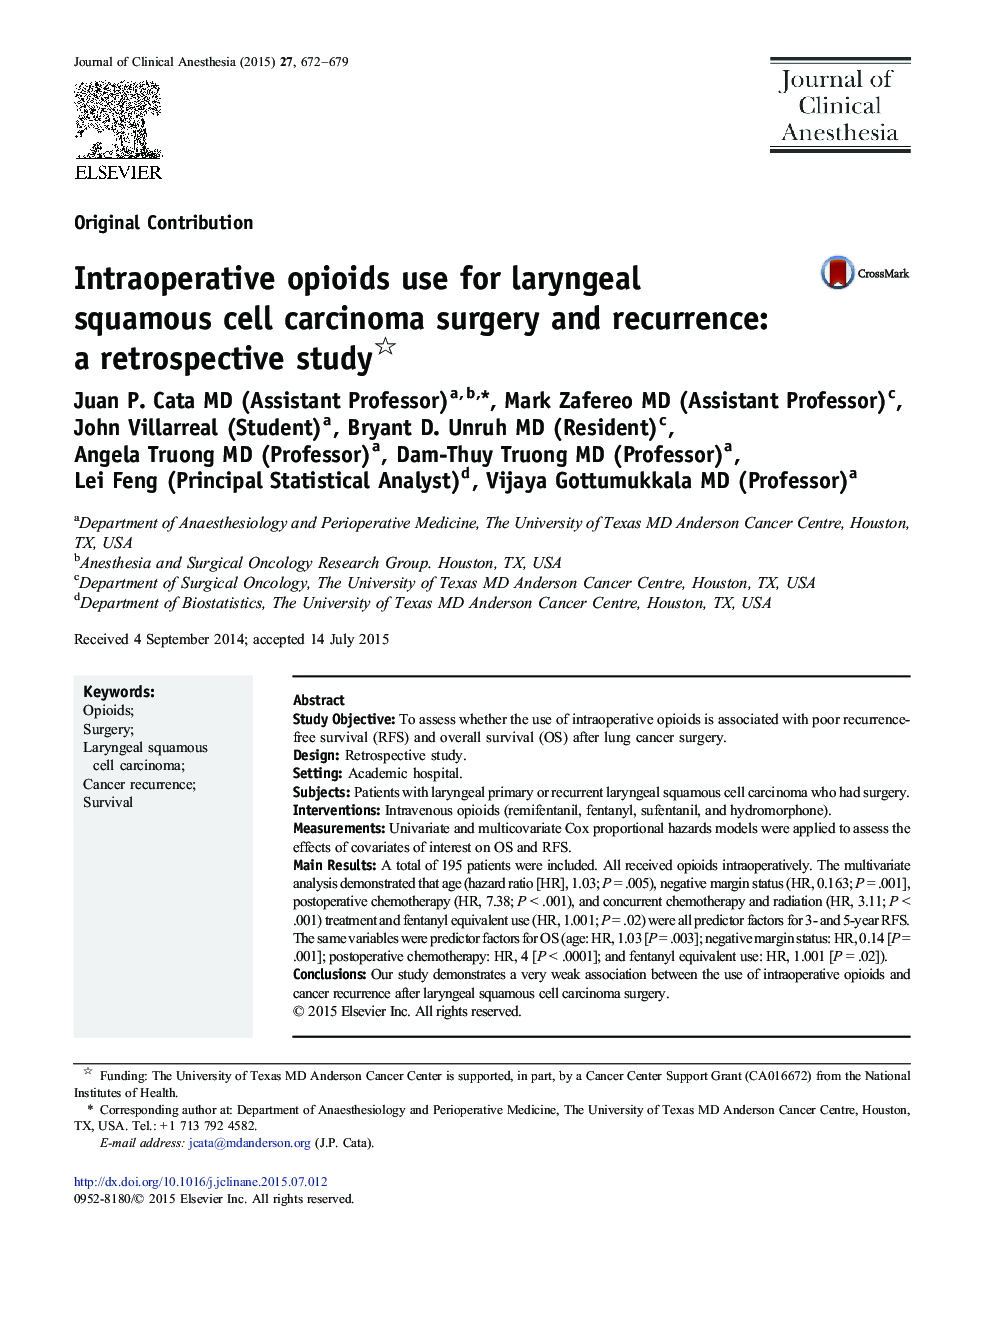 Intraoperative opioids use for laryngeal squamous cell carcinoma surgery and recurrence: a retrospective study 